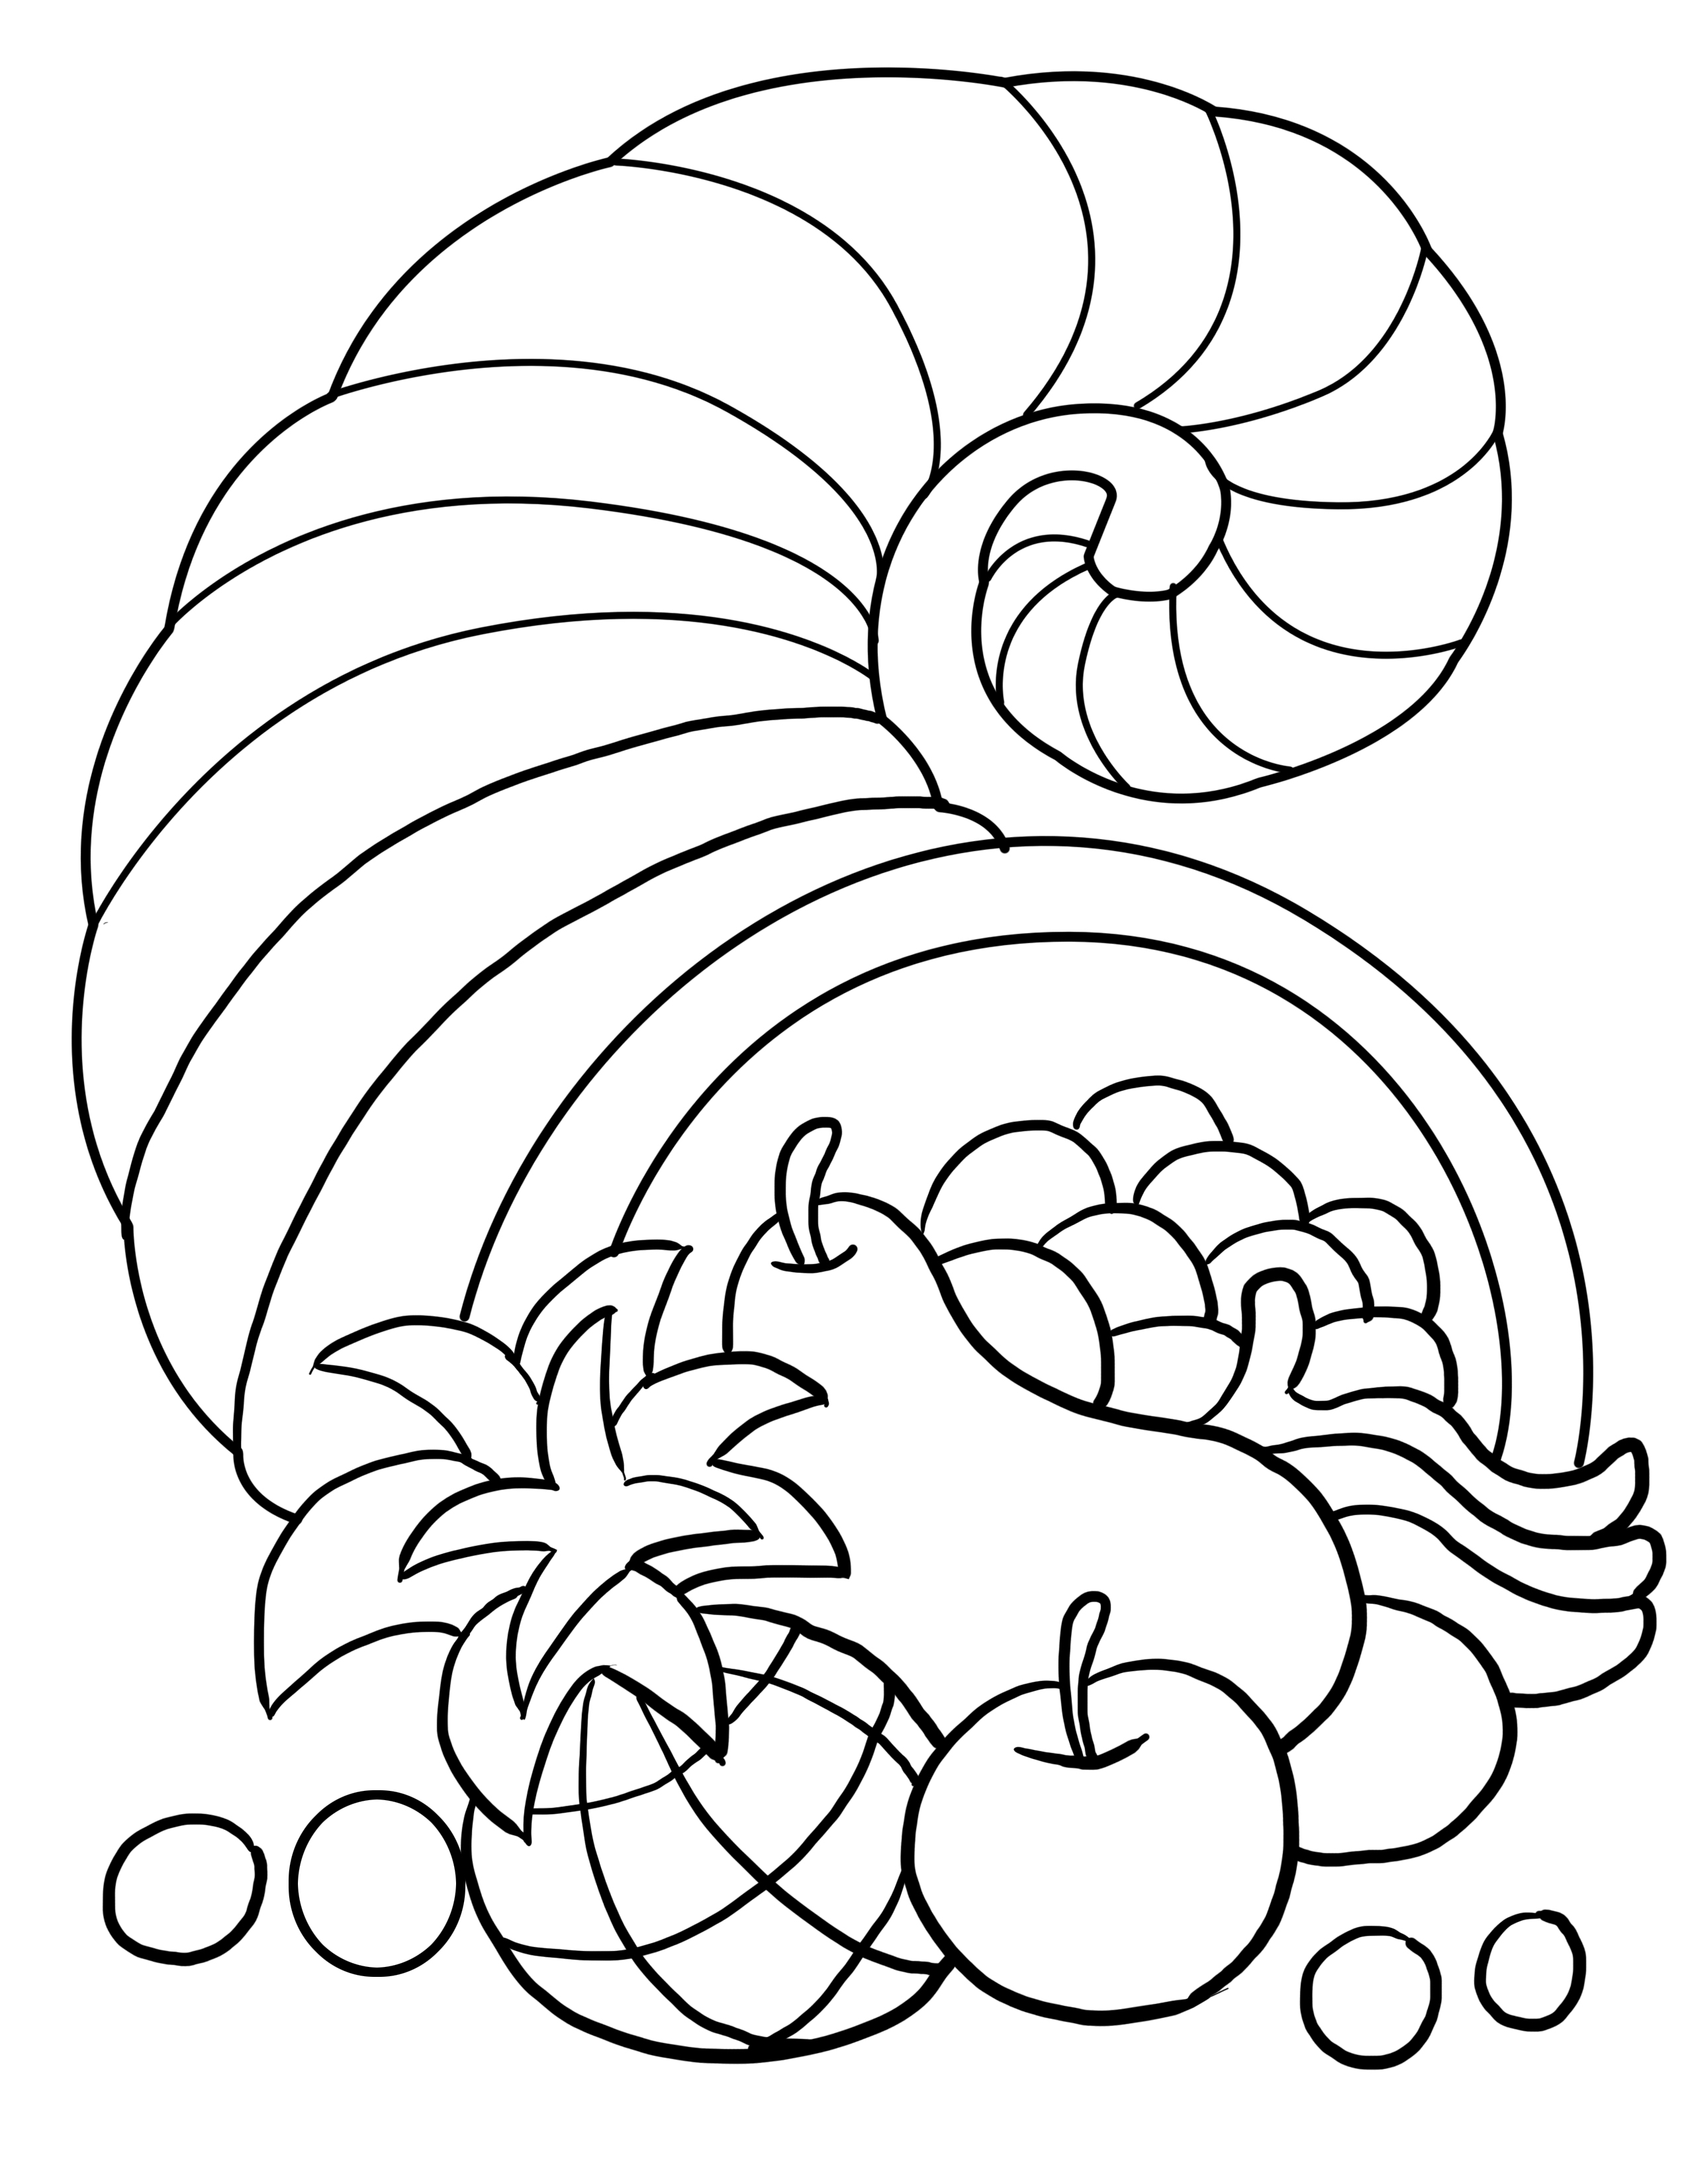 5-best-images-of-thanksgiving-turkey-coloring-pages-printables